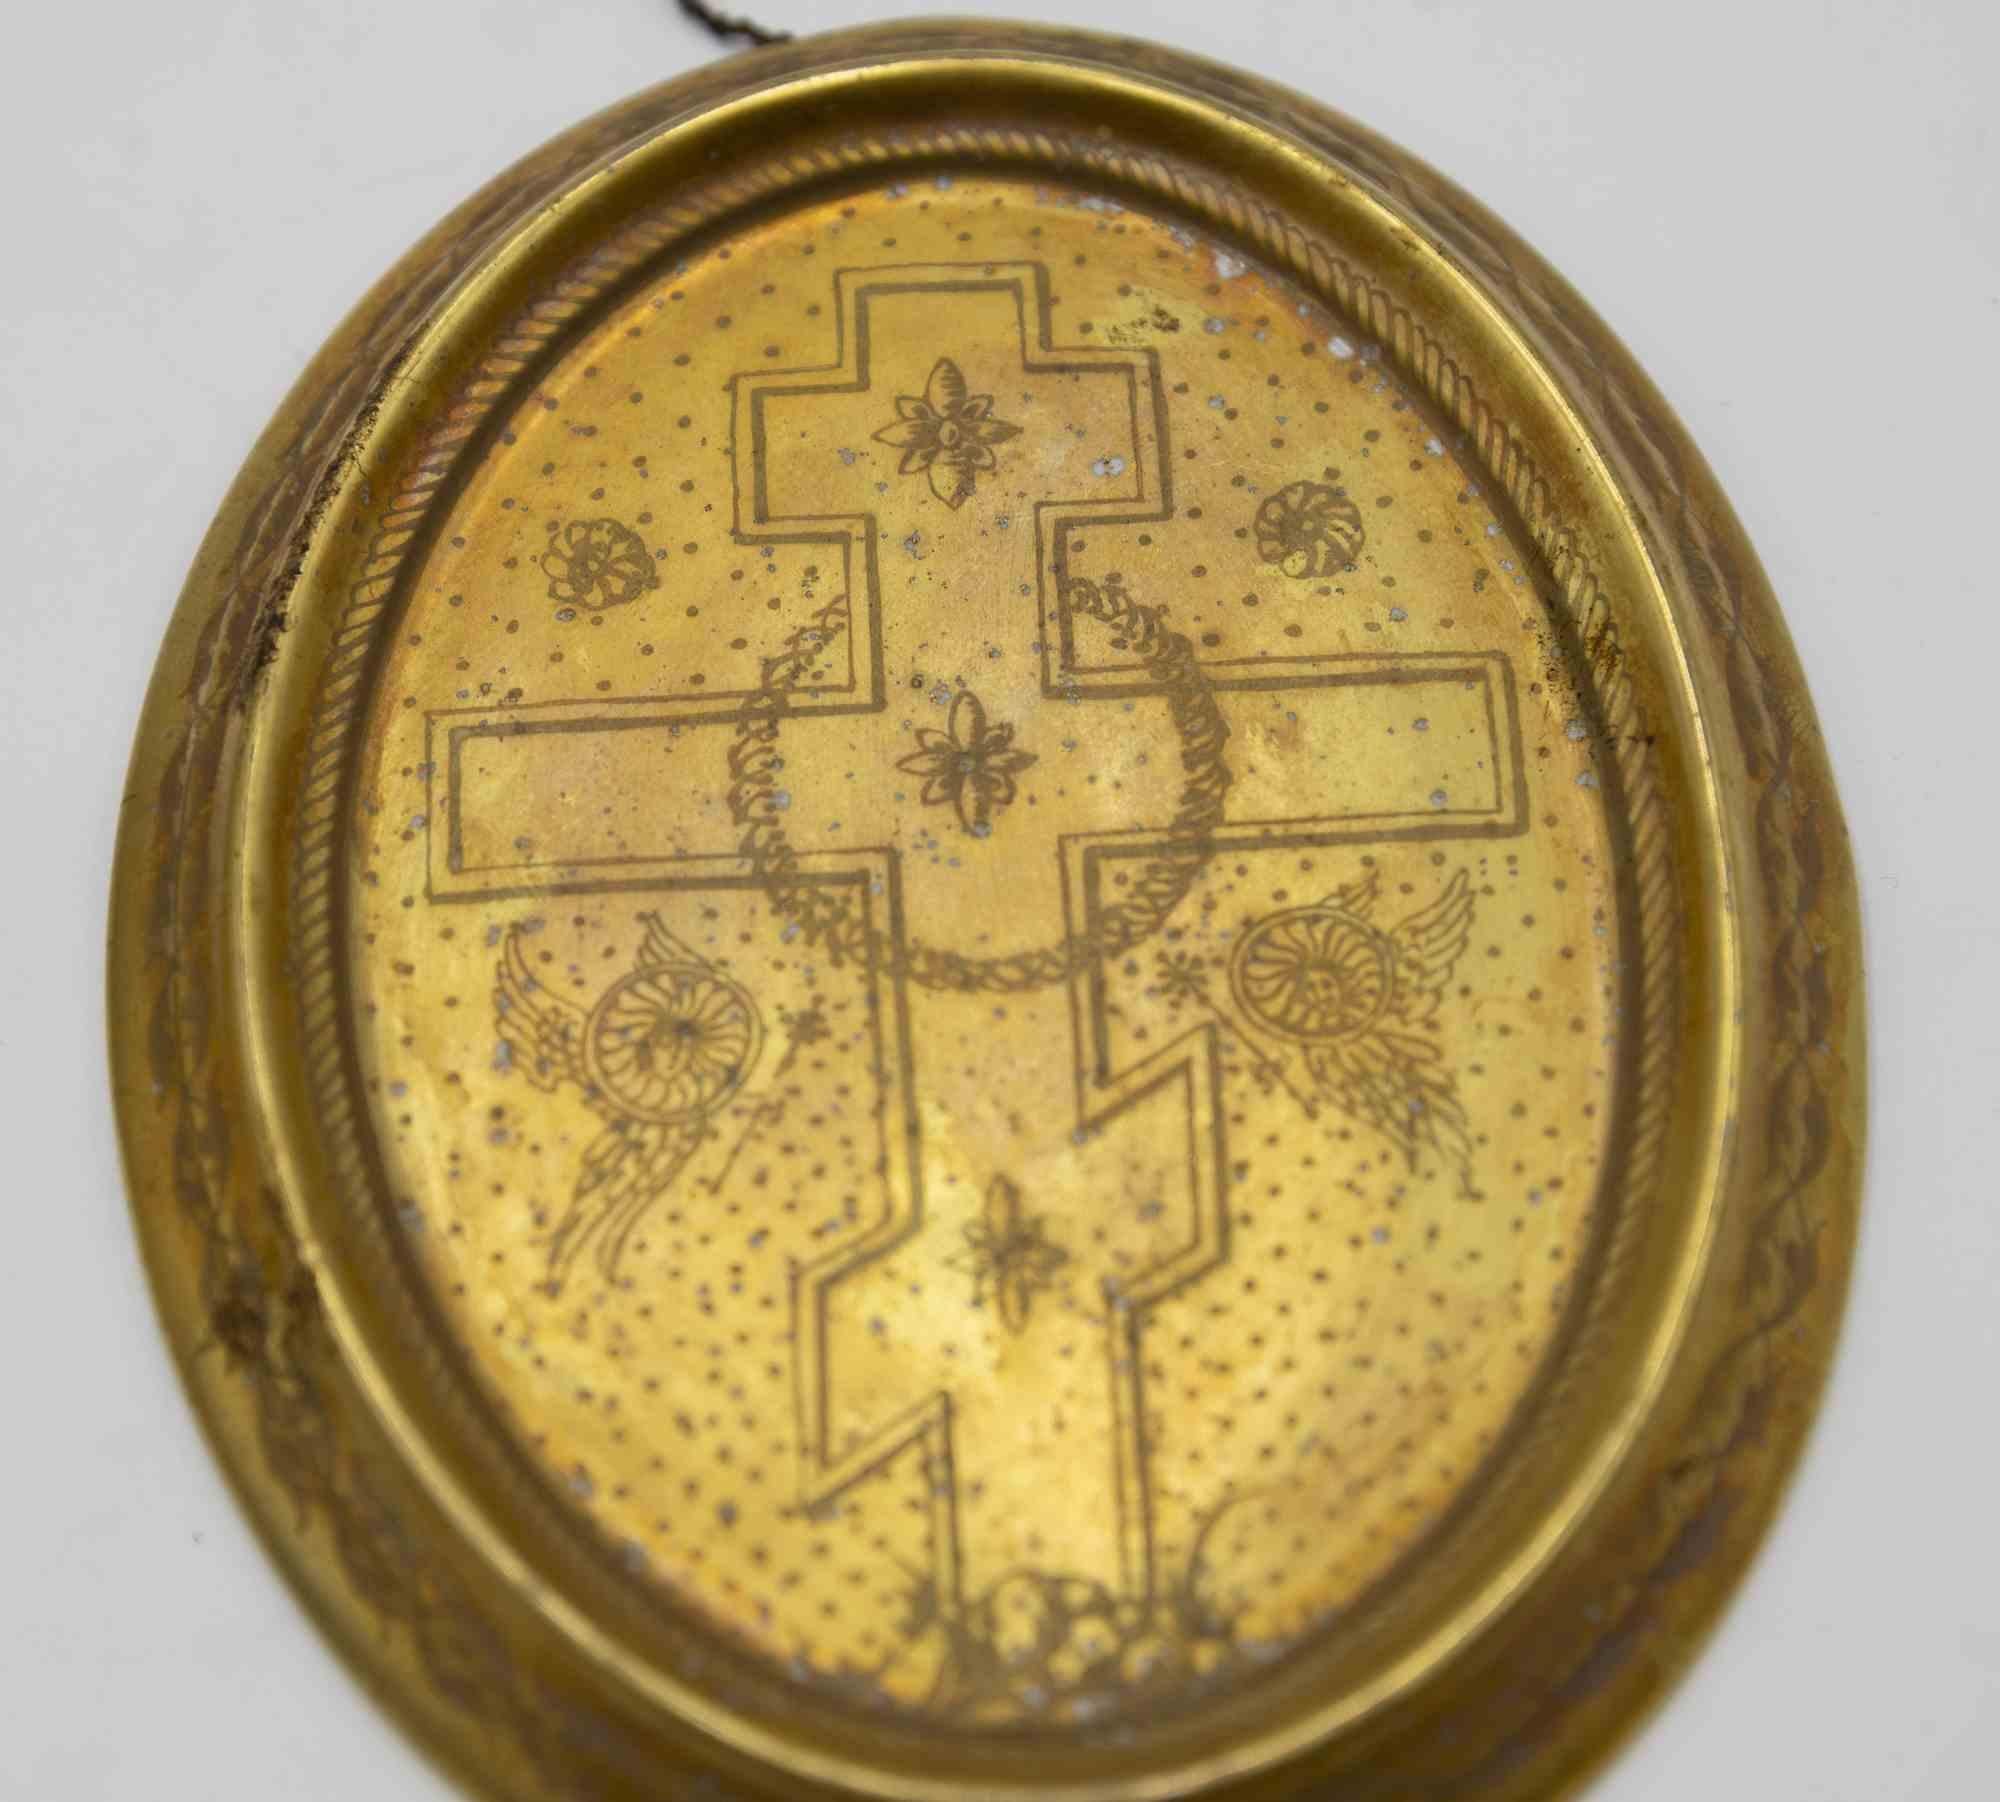 Pair of gilt porcelain plaques is a decorative object realized in the early 20th Century.

Liturgical discs depicting respectively a cross and the face of San Demetrio.

Inscription in Cyrillic (probably made in a Balkan country or commissioned